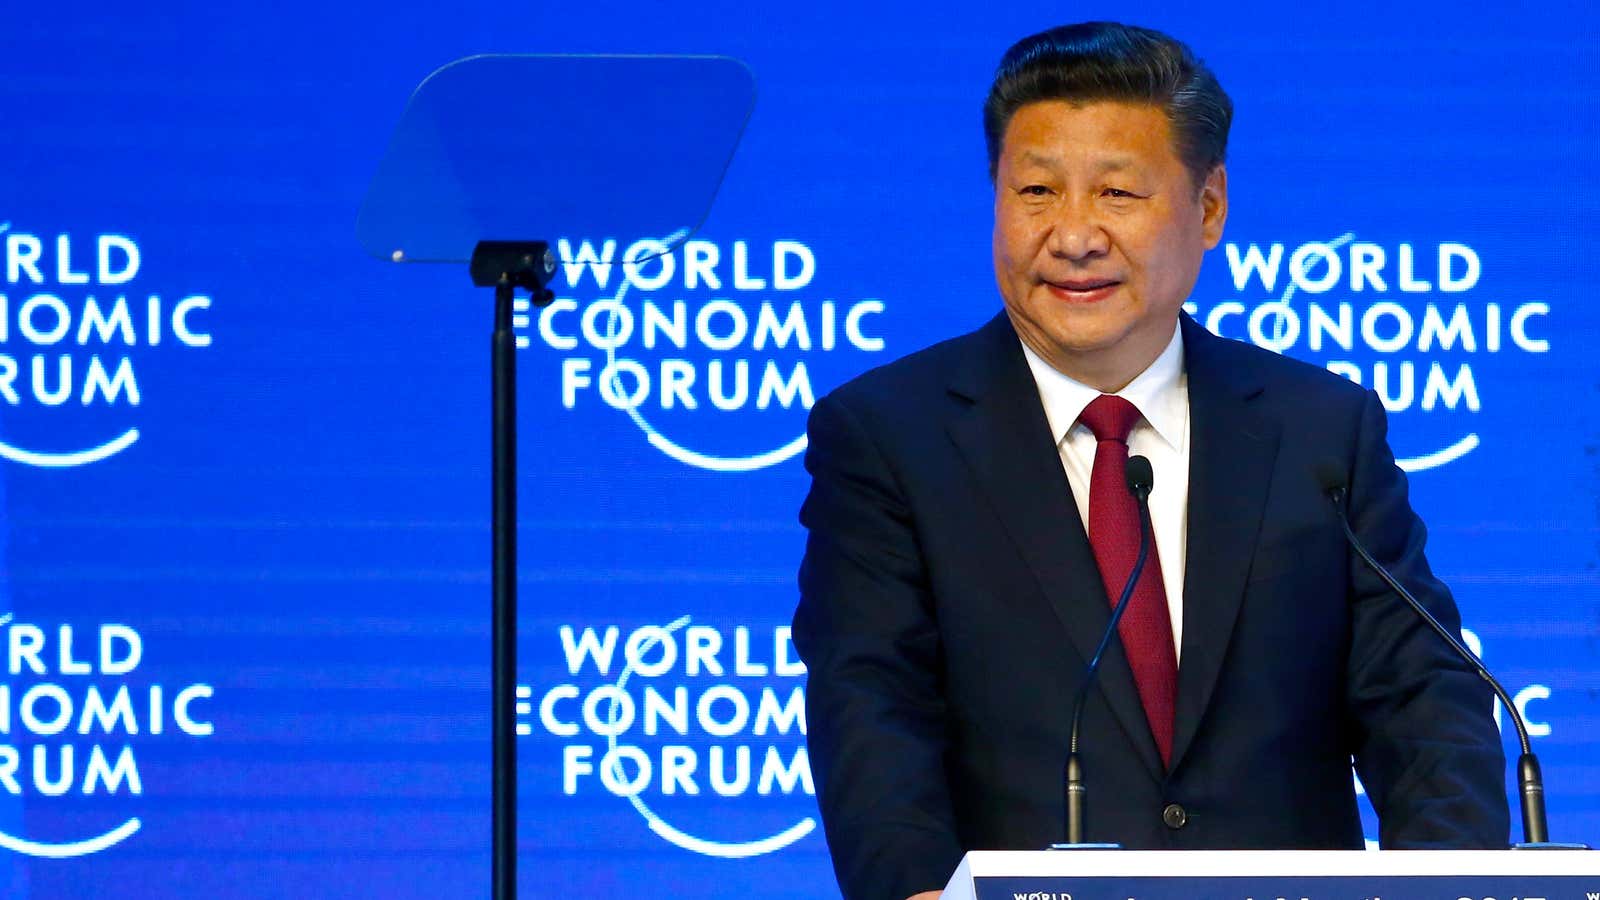 President Xi preached openness at Davos, now he needs policies to back it up.